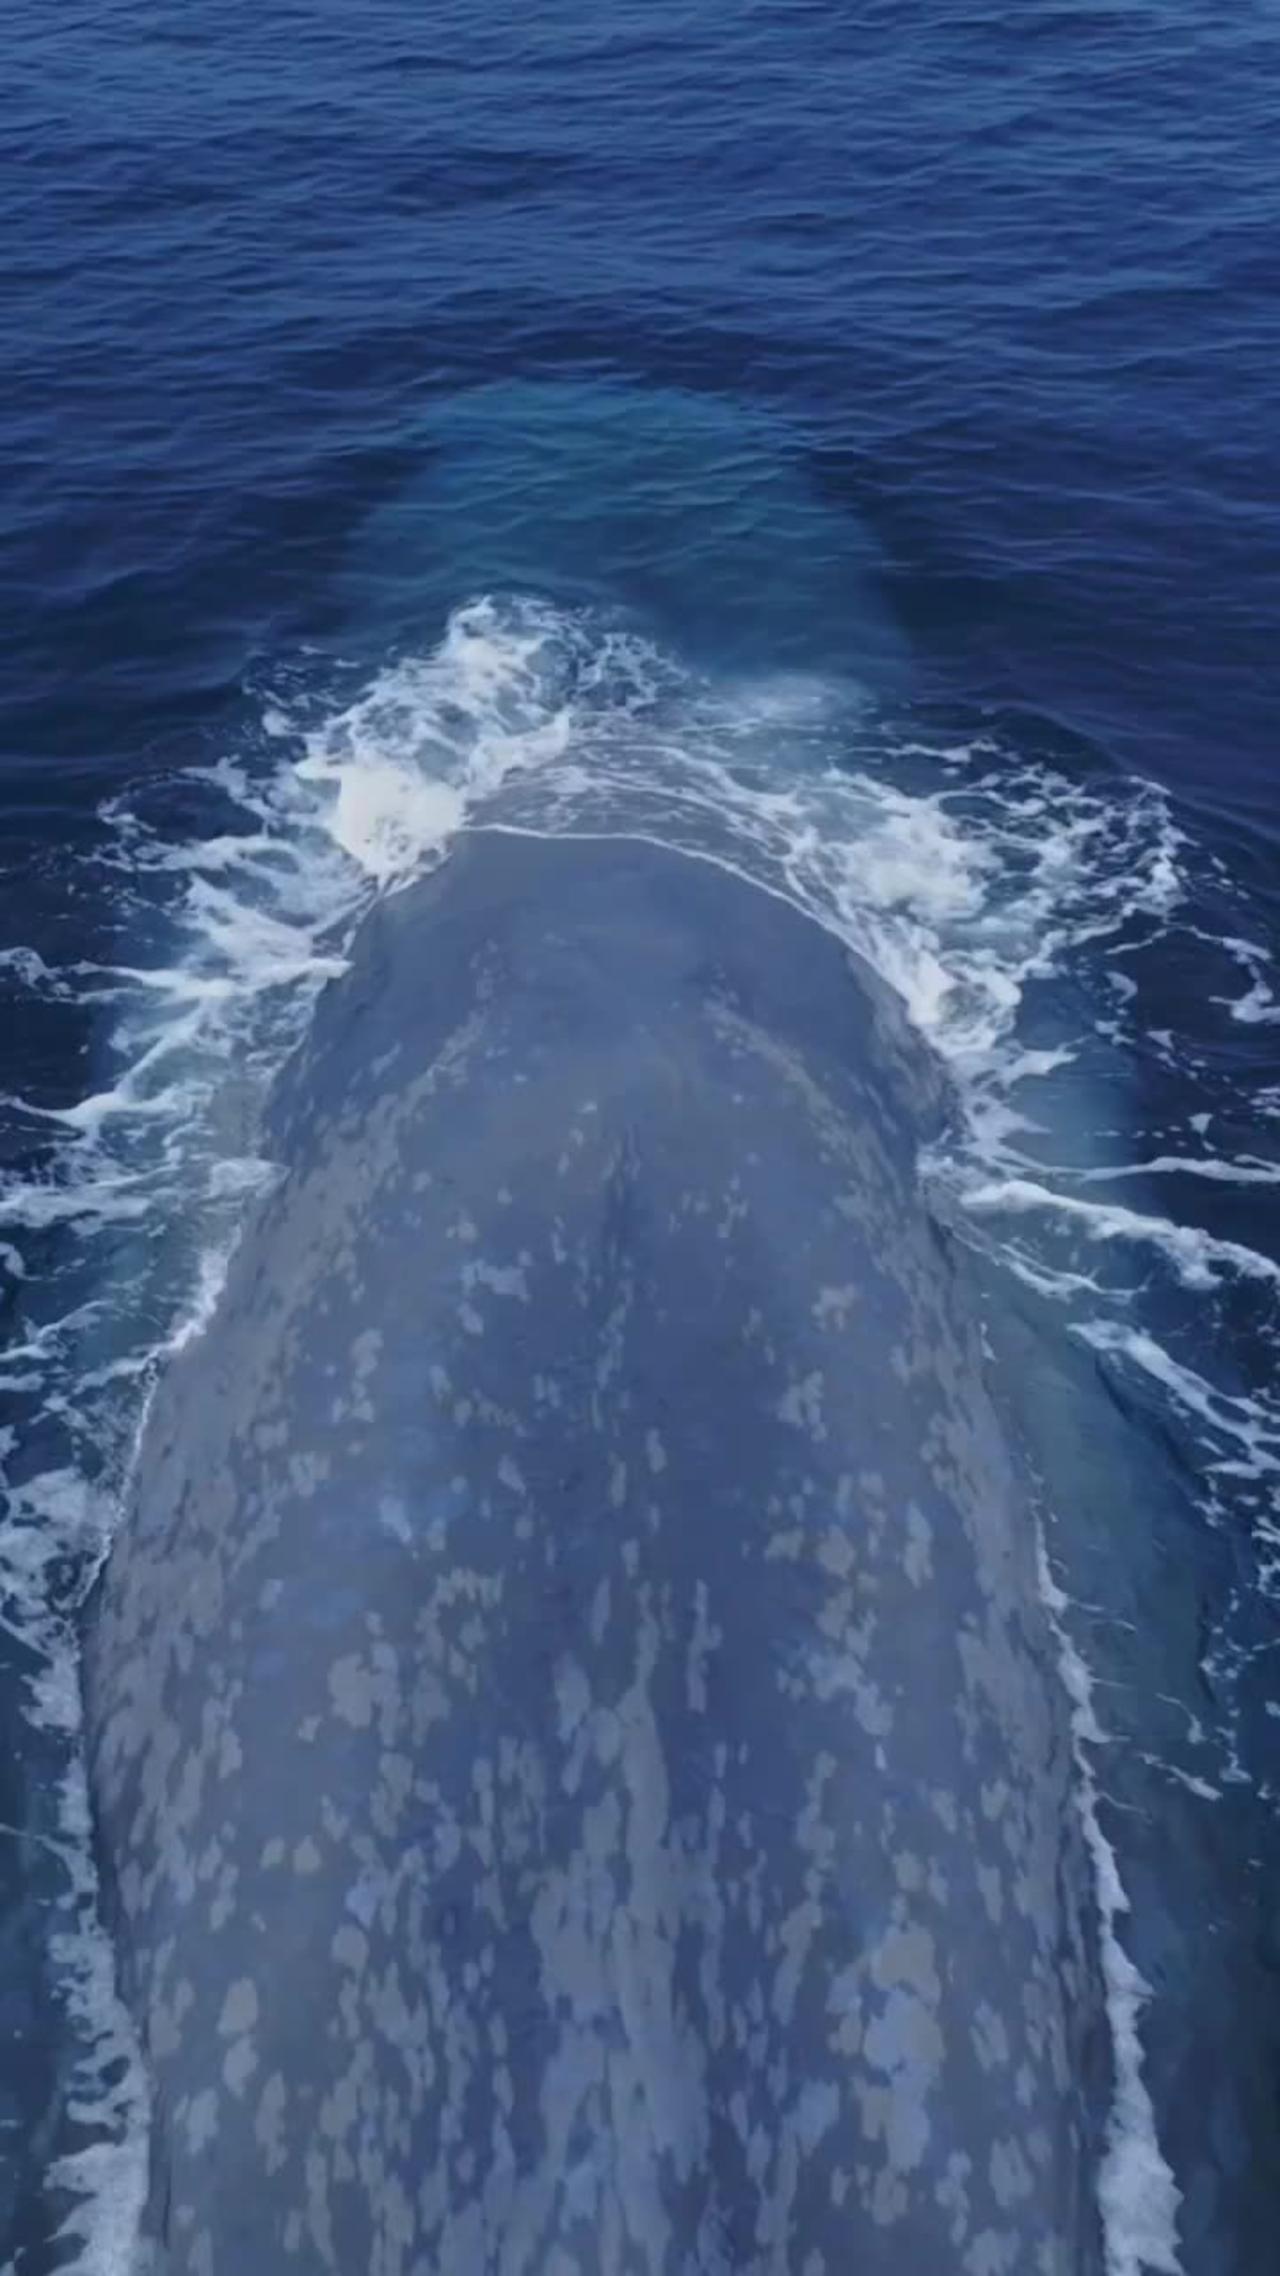 Amazing drone view of the Blue Whale!